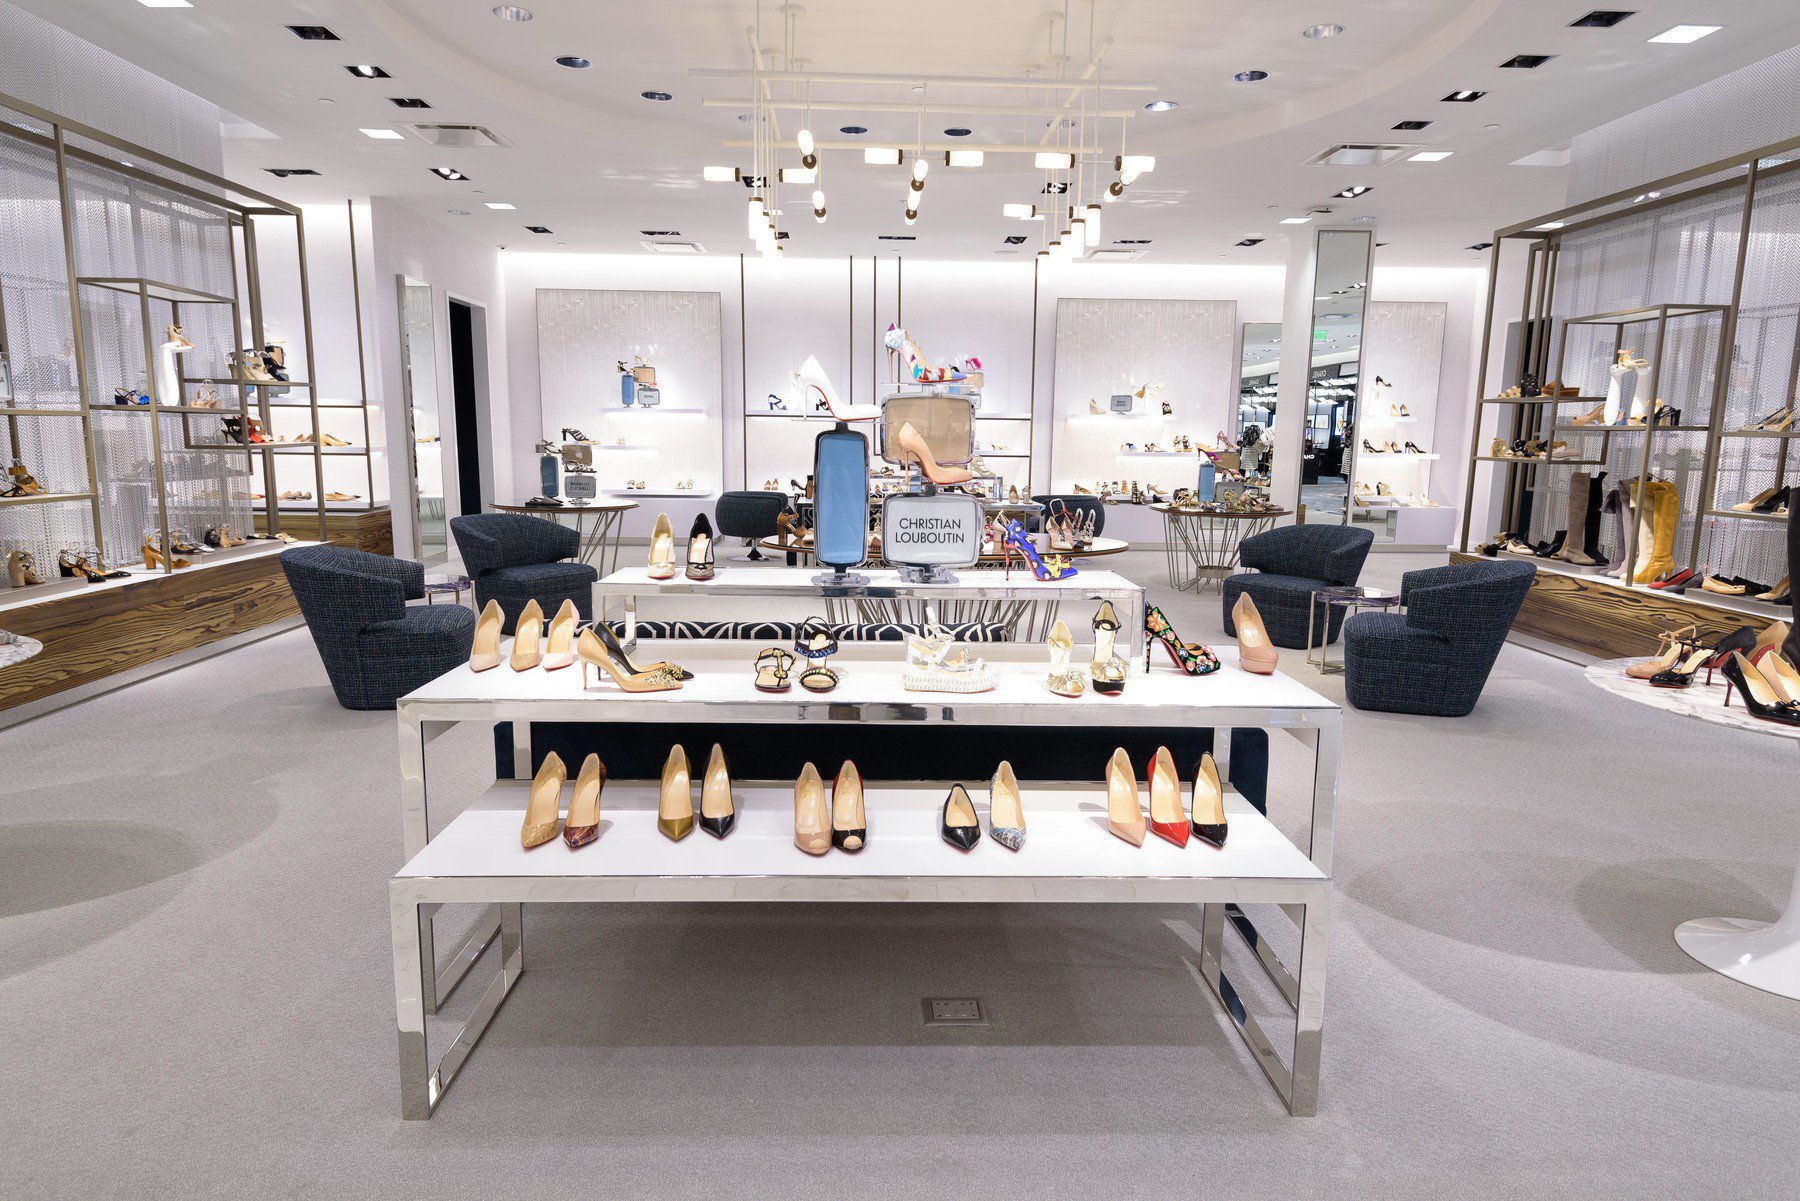 Neiman Marcus rebuilds brand after bankruptcy - Spinoso Real Estate Group